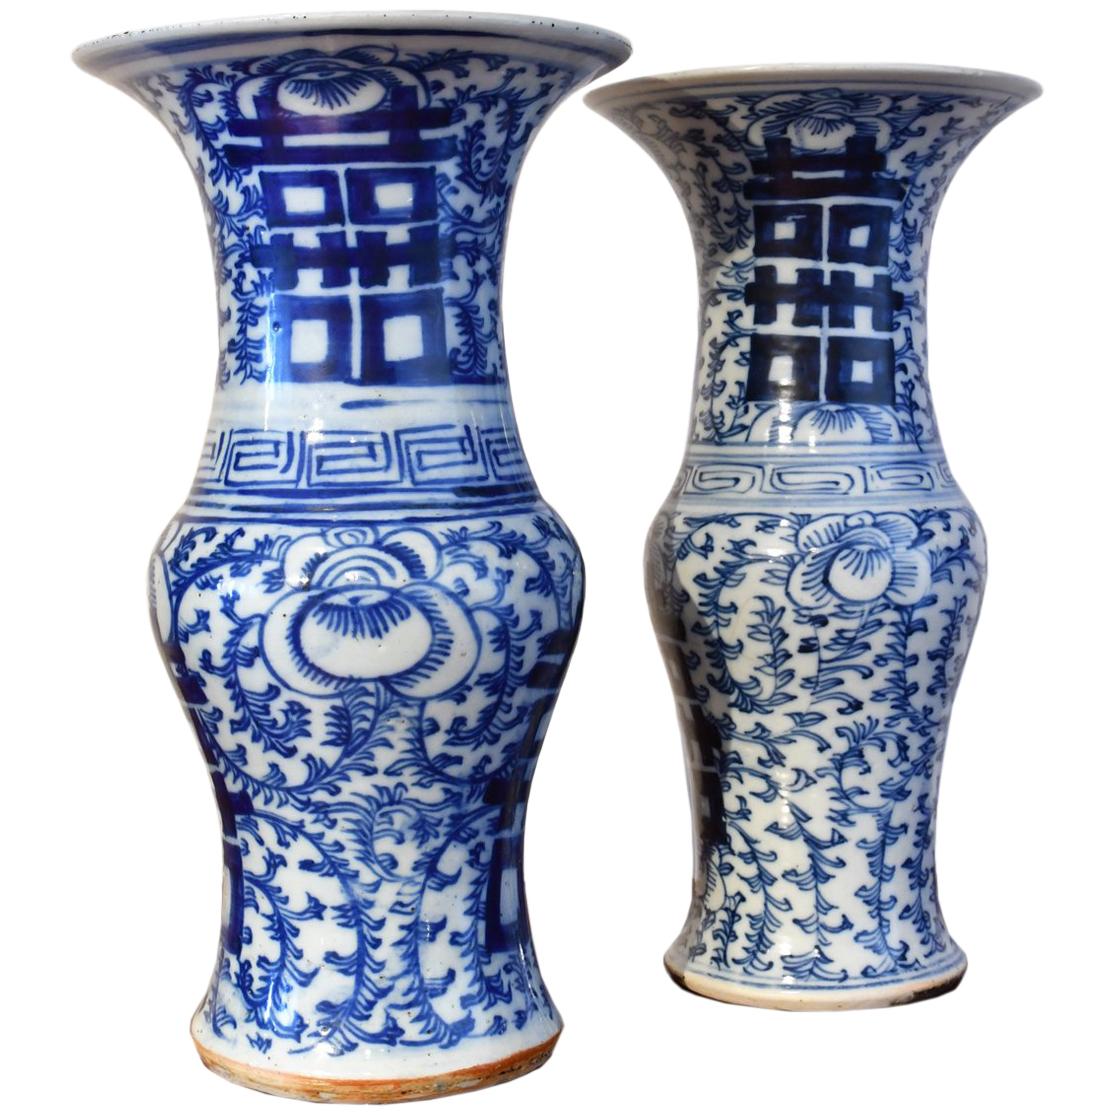 Set of Two 19th Century Qing Chinese Porcelain Blue and White Gu-Form Vases